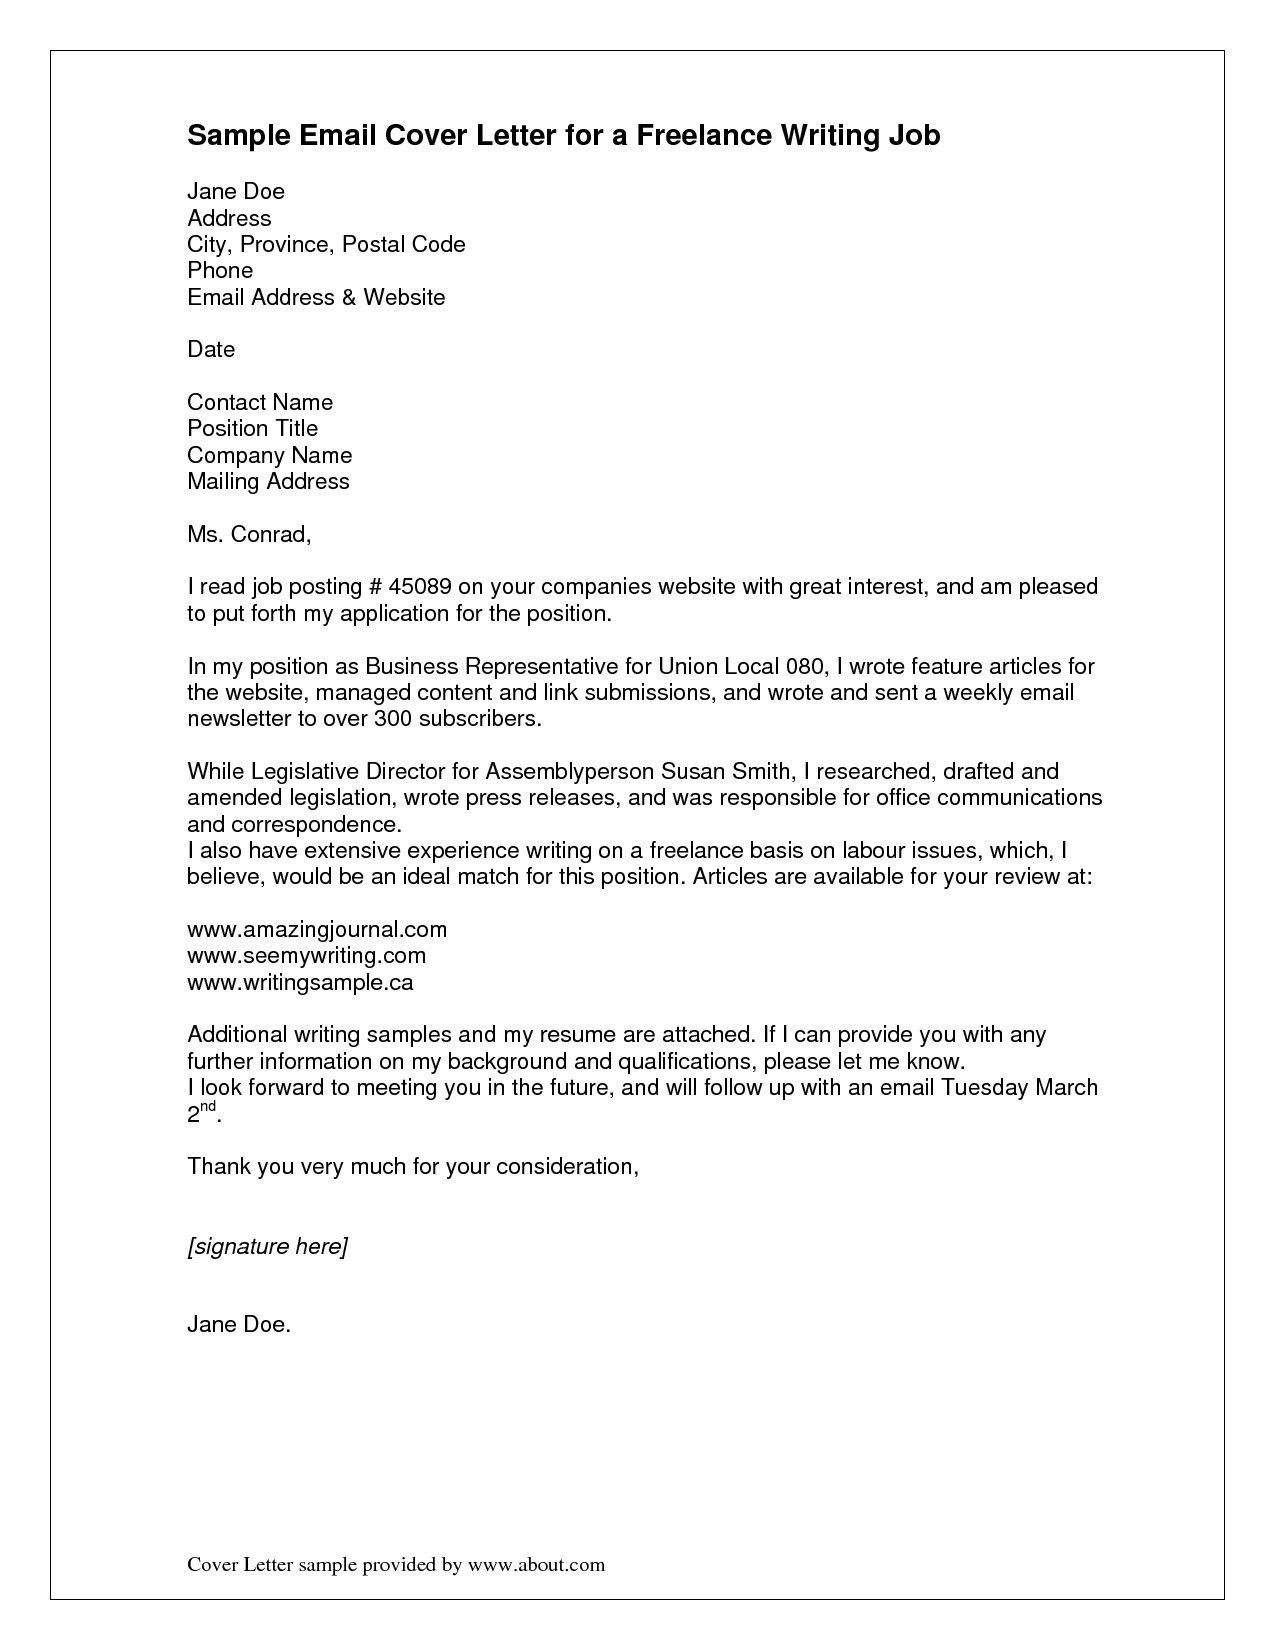 Email with Cover Letter and Resume attached Sample Email Cover Letter Template Uk Email Cover Letter, Cover Letter …